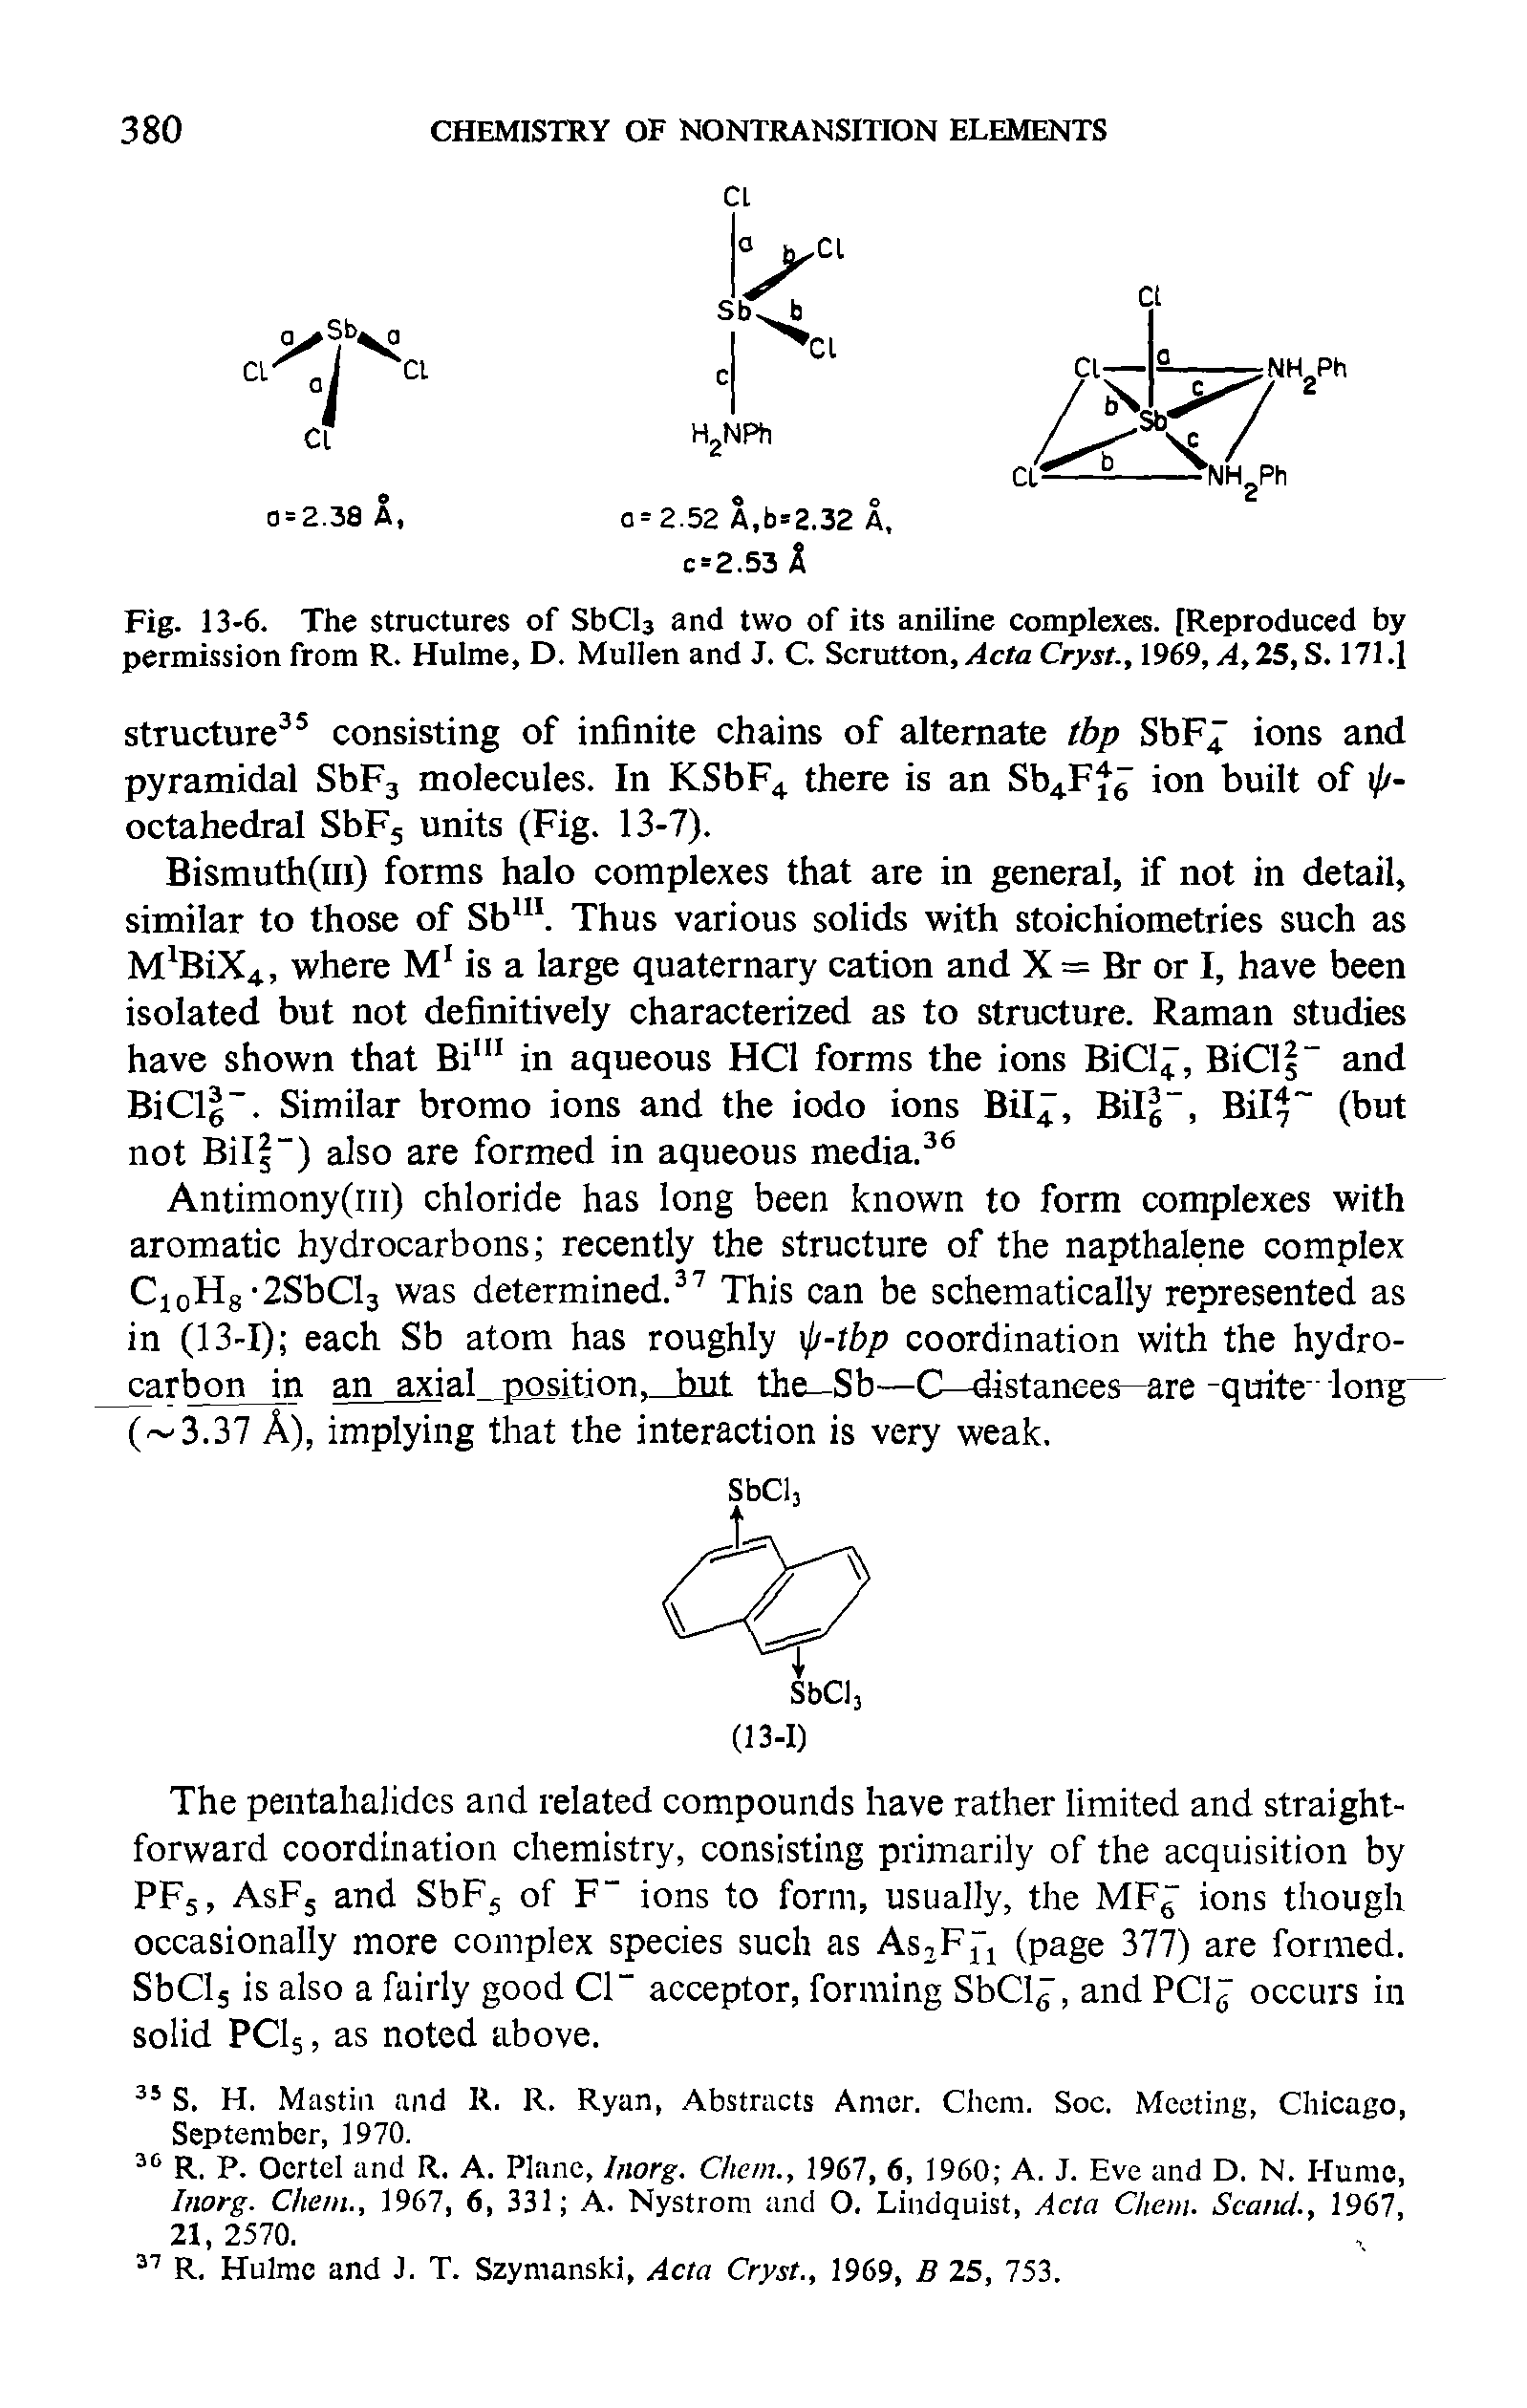 Fig. 13-6. The structures of SbCl3 and two of its aniline complexes. [Reproduced by permission from R. Hulme, D. Mullen and J. C. Scrutton, Acta Cryst., 1969, A, 25, S. 171.1...